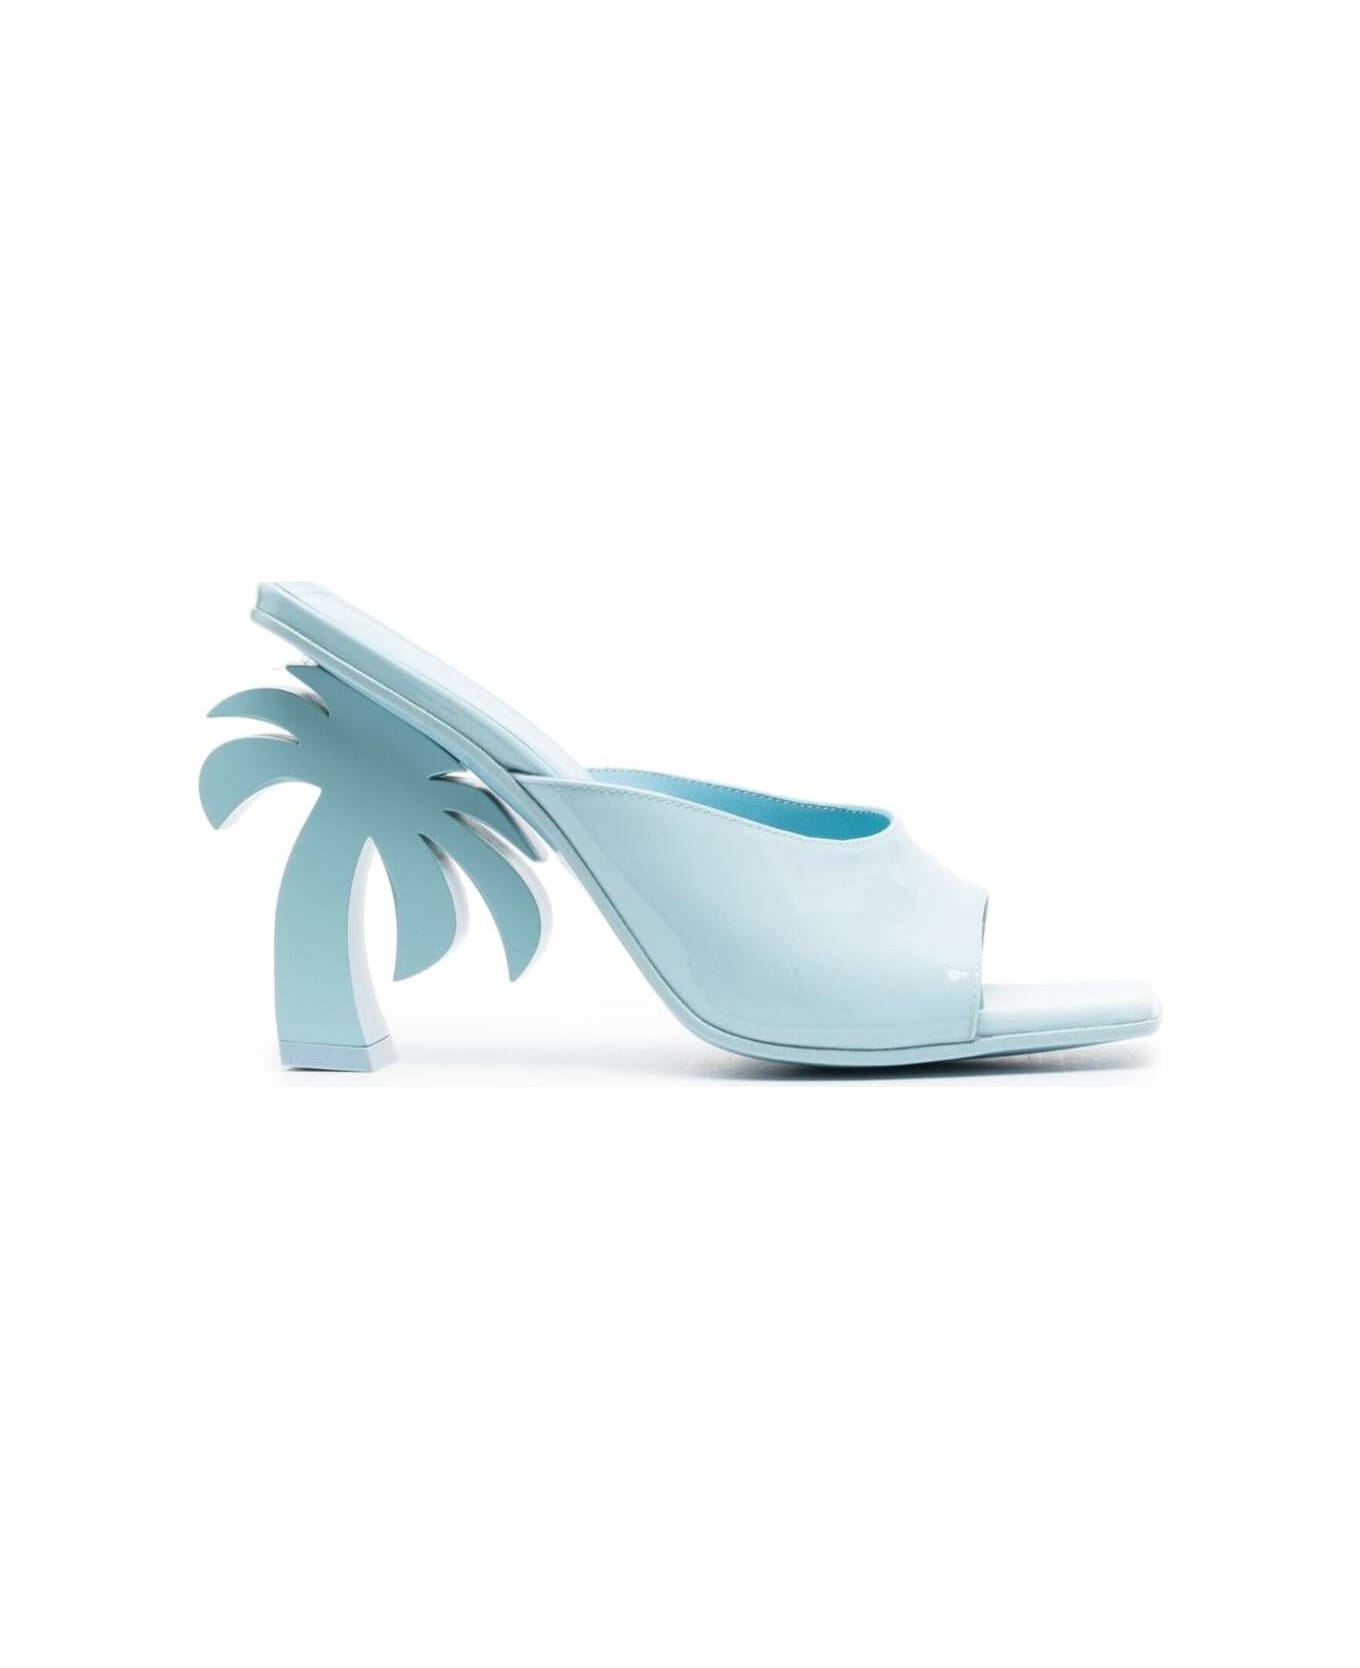 Palm Angels 'palm Tree' Blue Mules With Palm Tree-shaped Heel In Leather Woman - Light blue サンダル